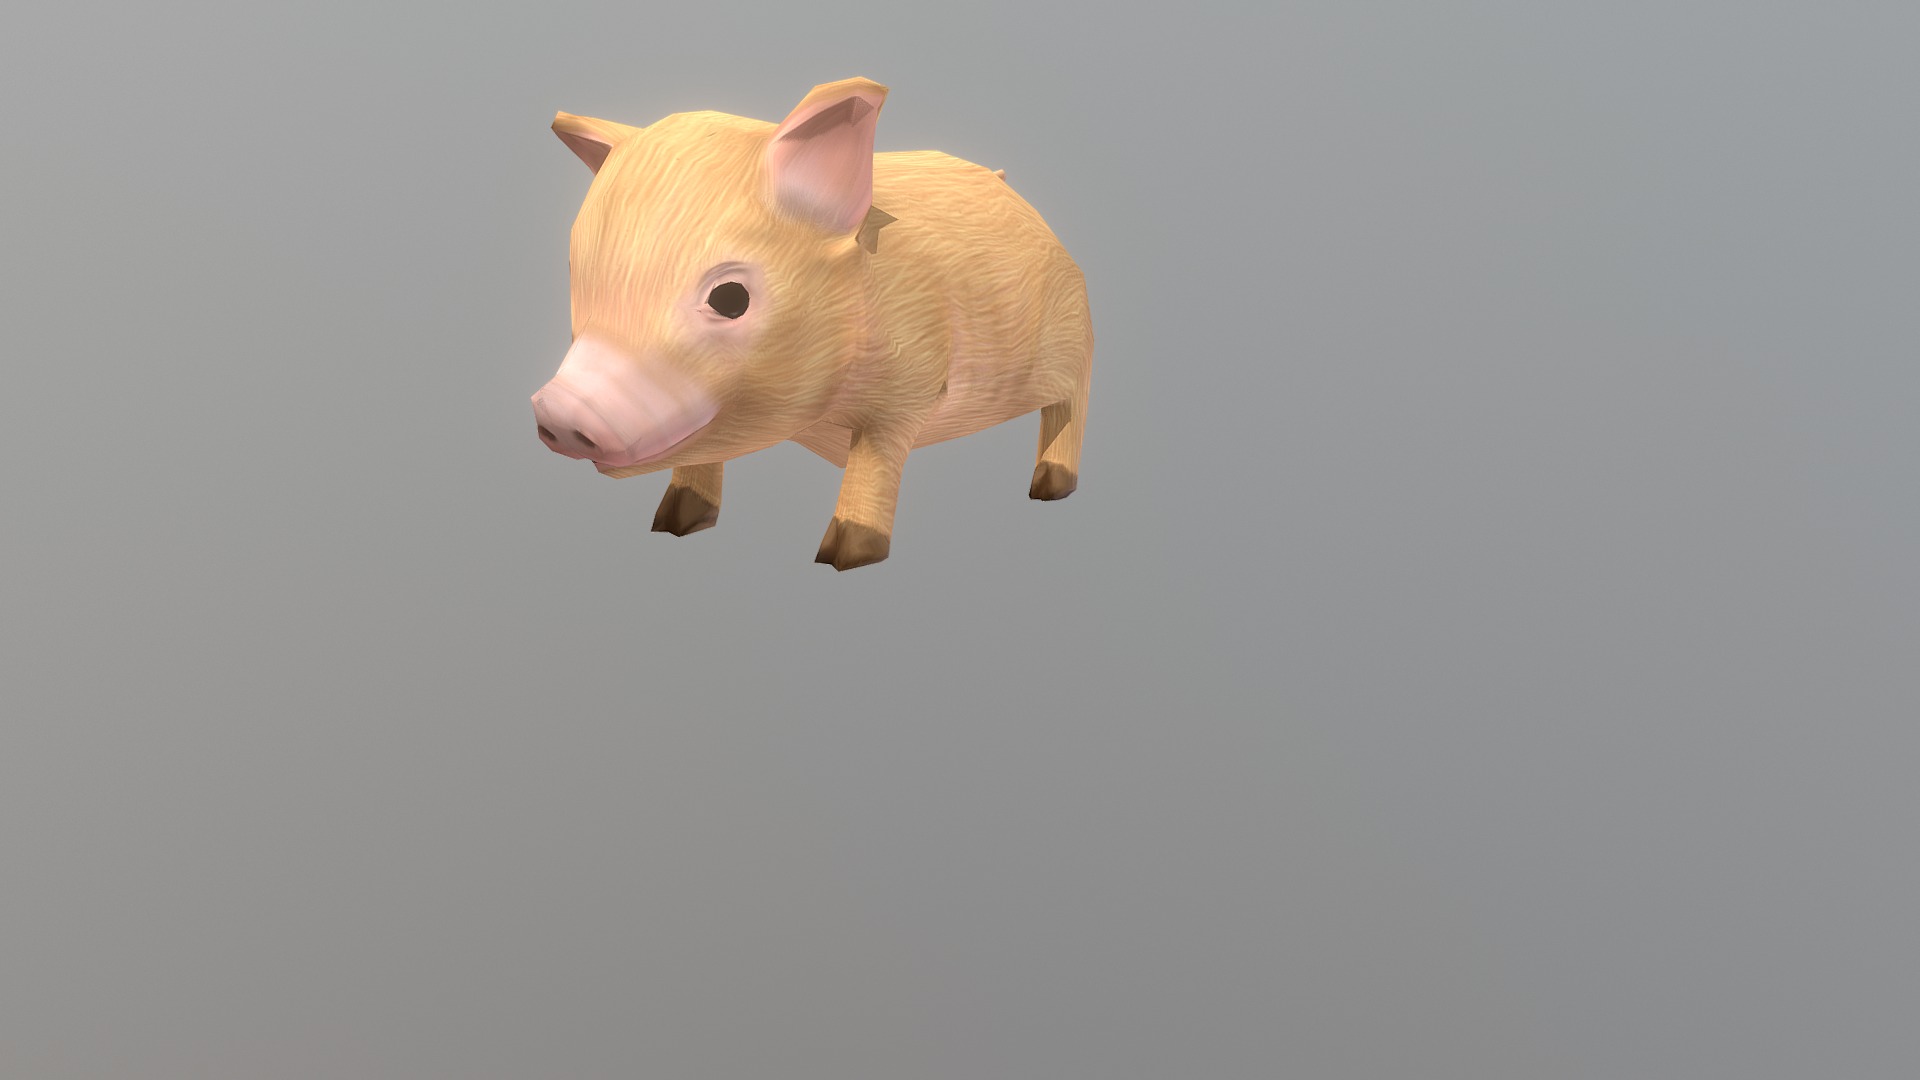 3D model Pig low poly - This is a 3D model of the Pig low poly. The 3D model is about a pink pig on a grey background.